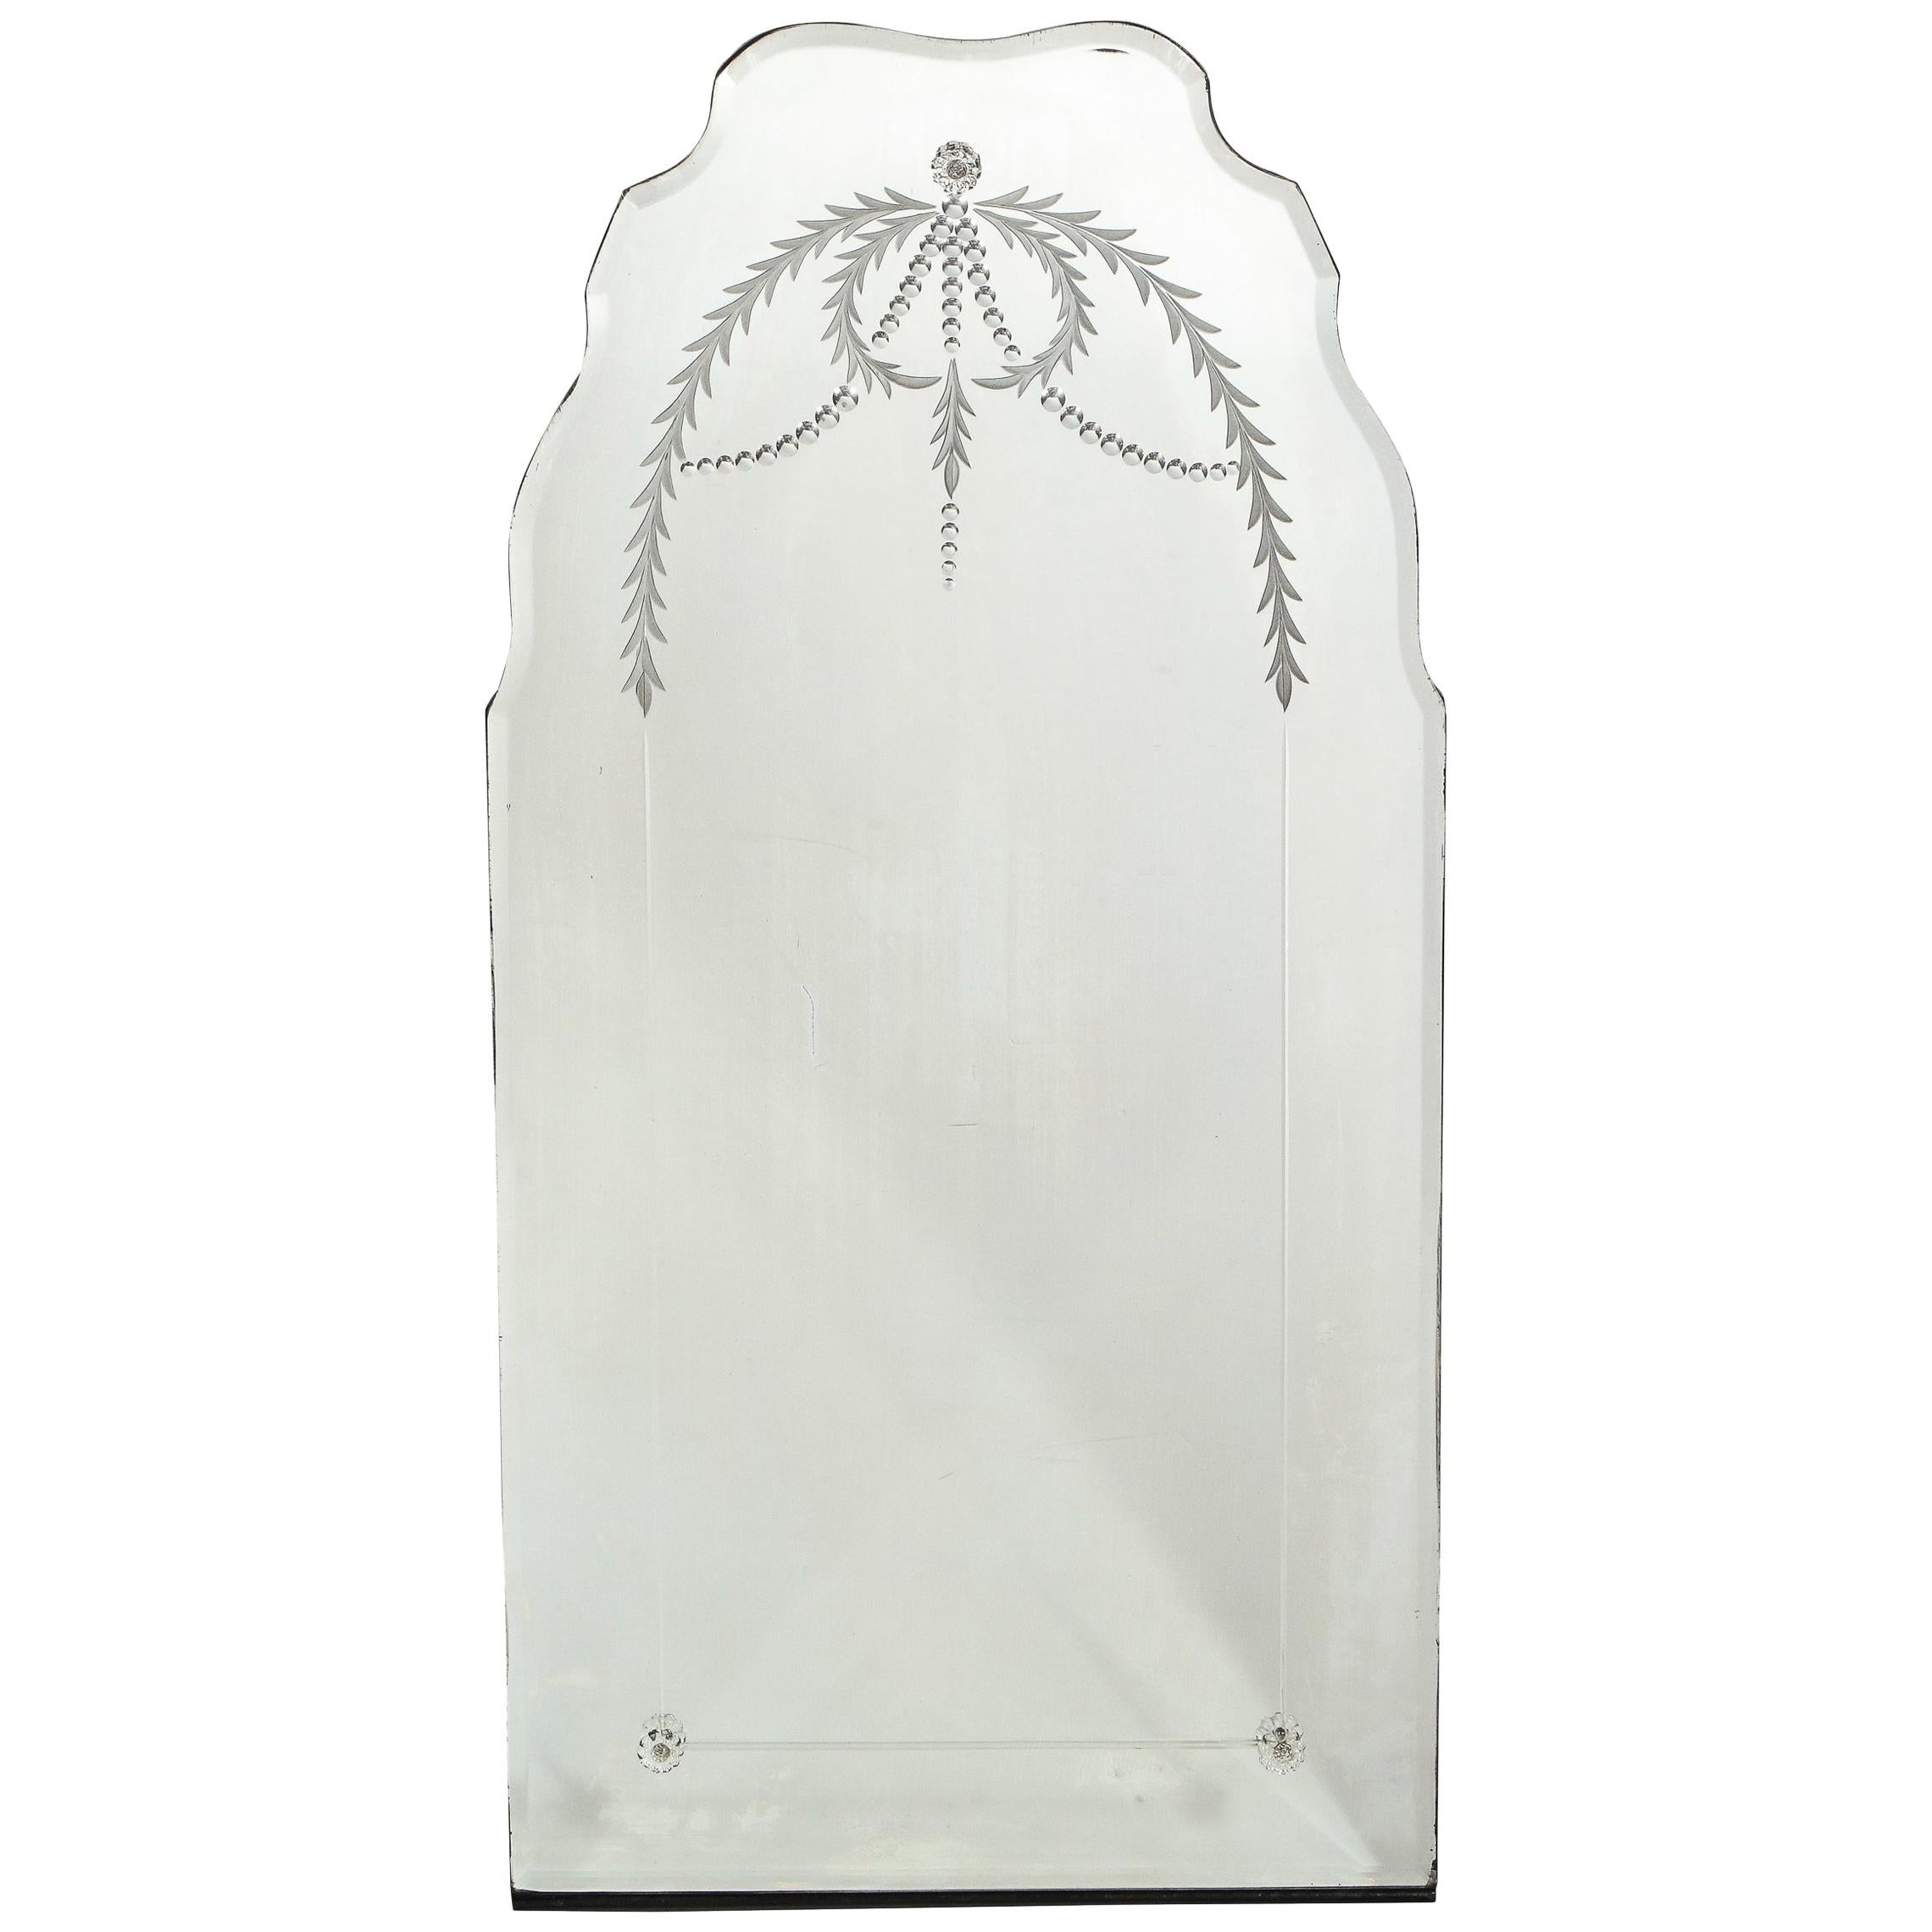 Art Deco Mirror with Laurel Wreath Detailing, Chain Beveling & Scalloped Borders